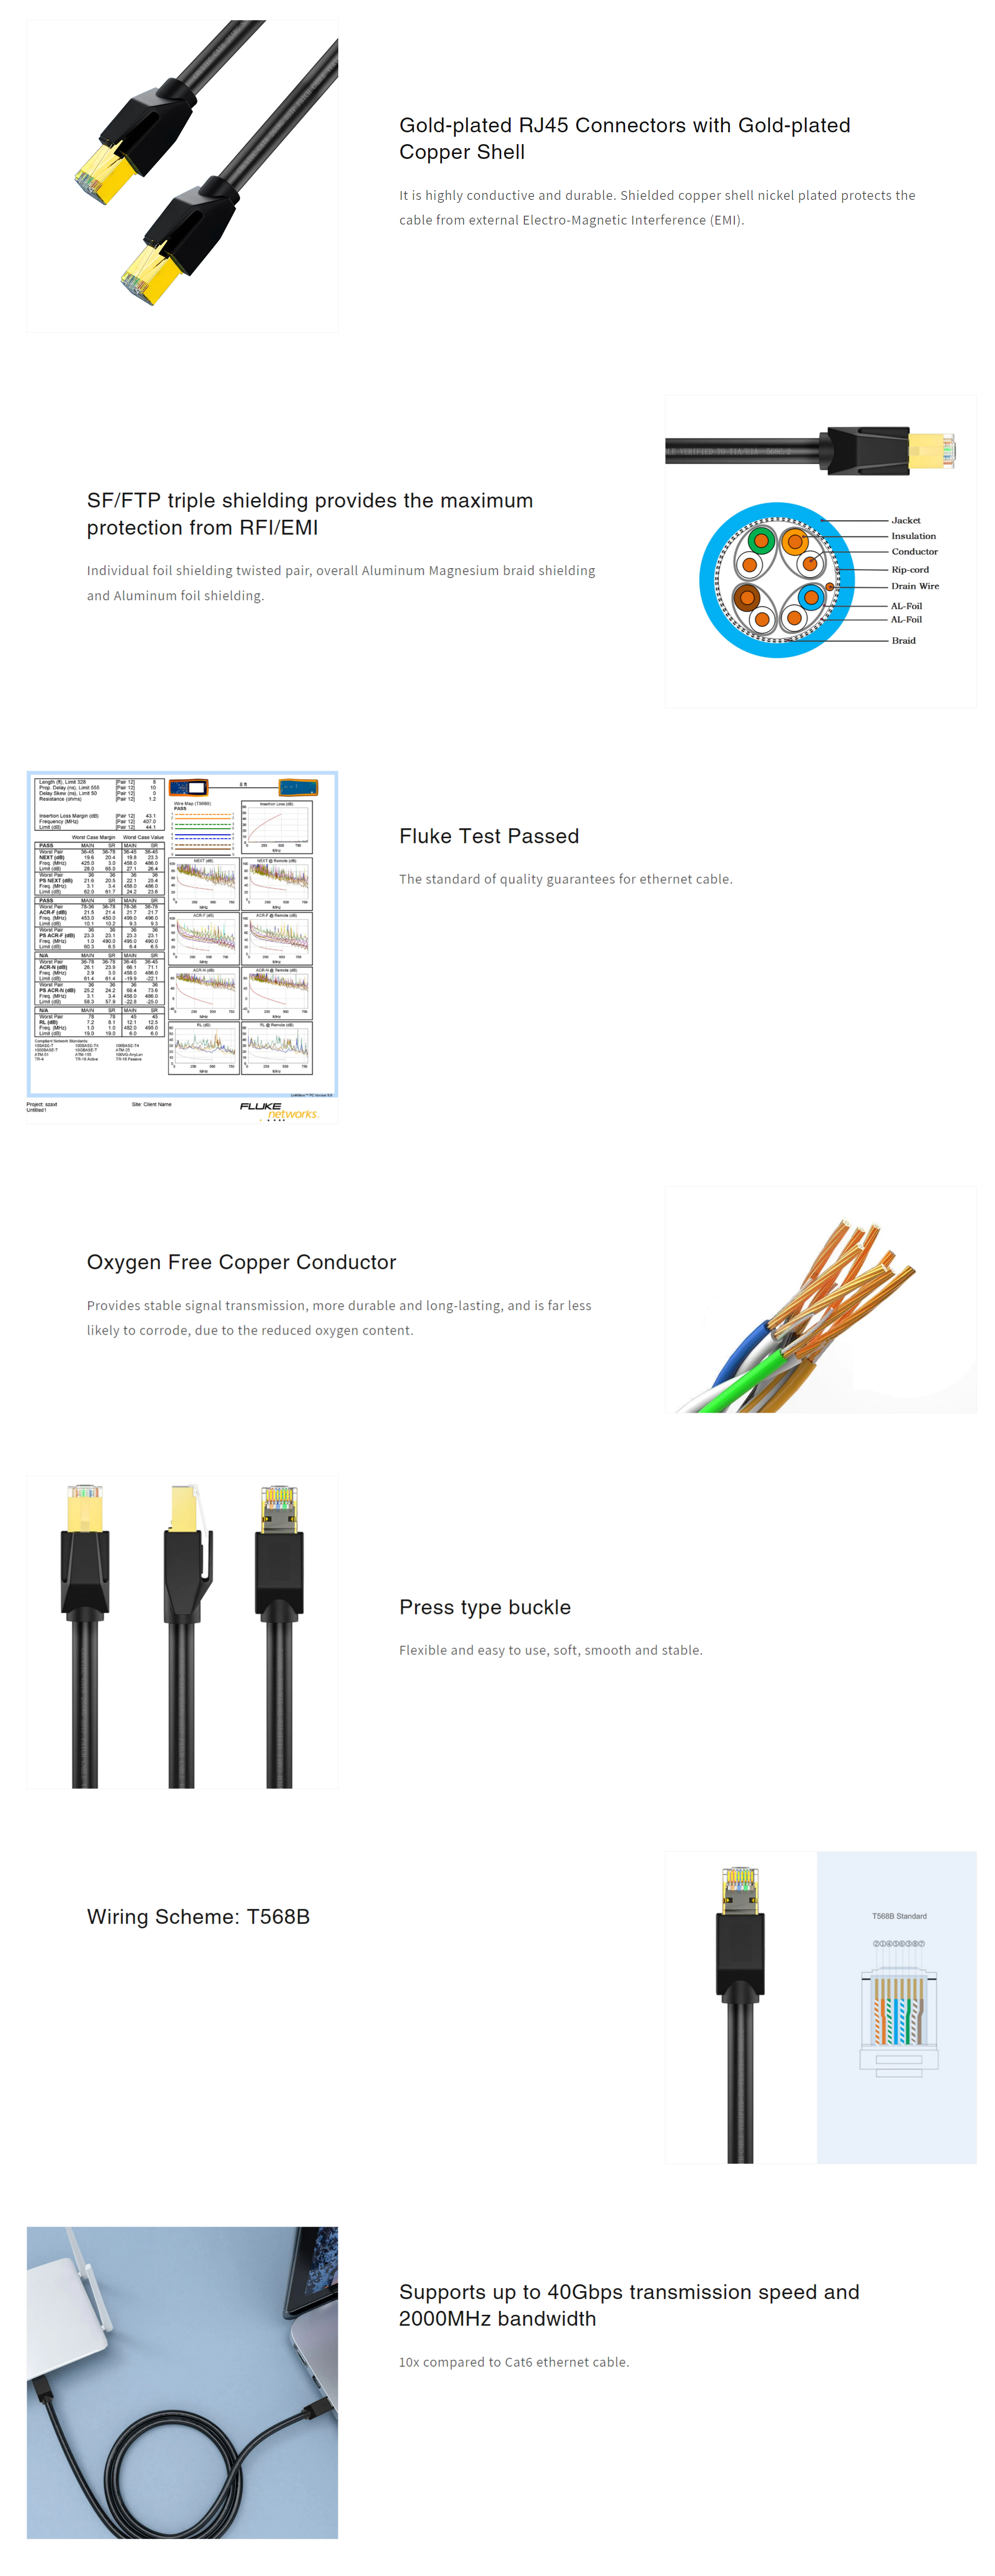 A large marketing image providing additional information about the product Cruxtec CAT8 1m 40GbE SF/FTP Triple Shielding Ethernet Cable Black - Additional alt info not provided